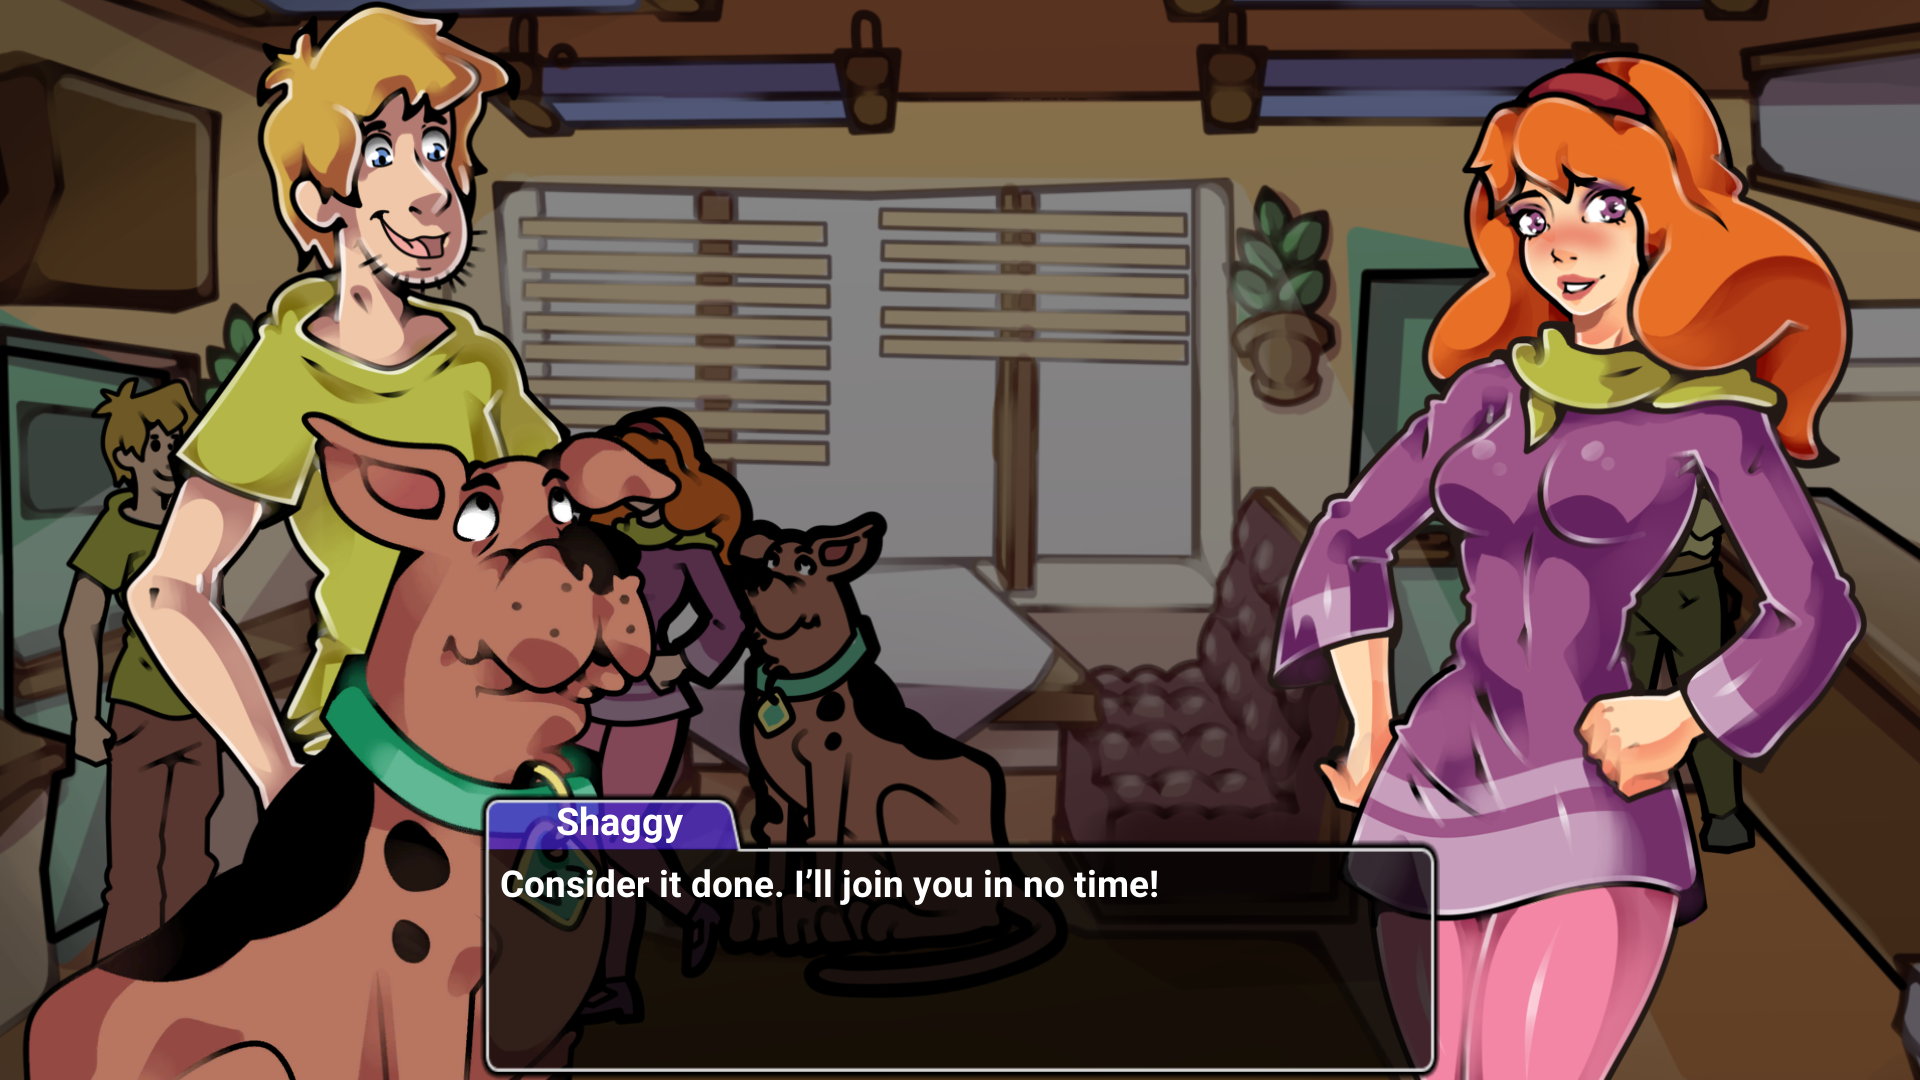 Free Scooby Doo Sex Games - Scooby-Doo! A Depraved Investigation [DEMO] - free game download, reviews,  mega - xGames